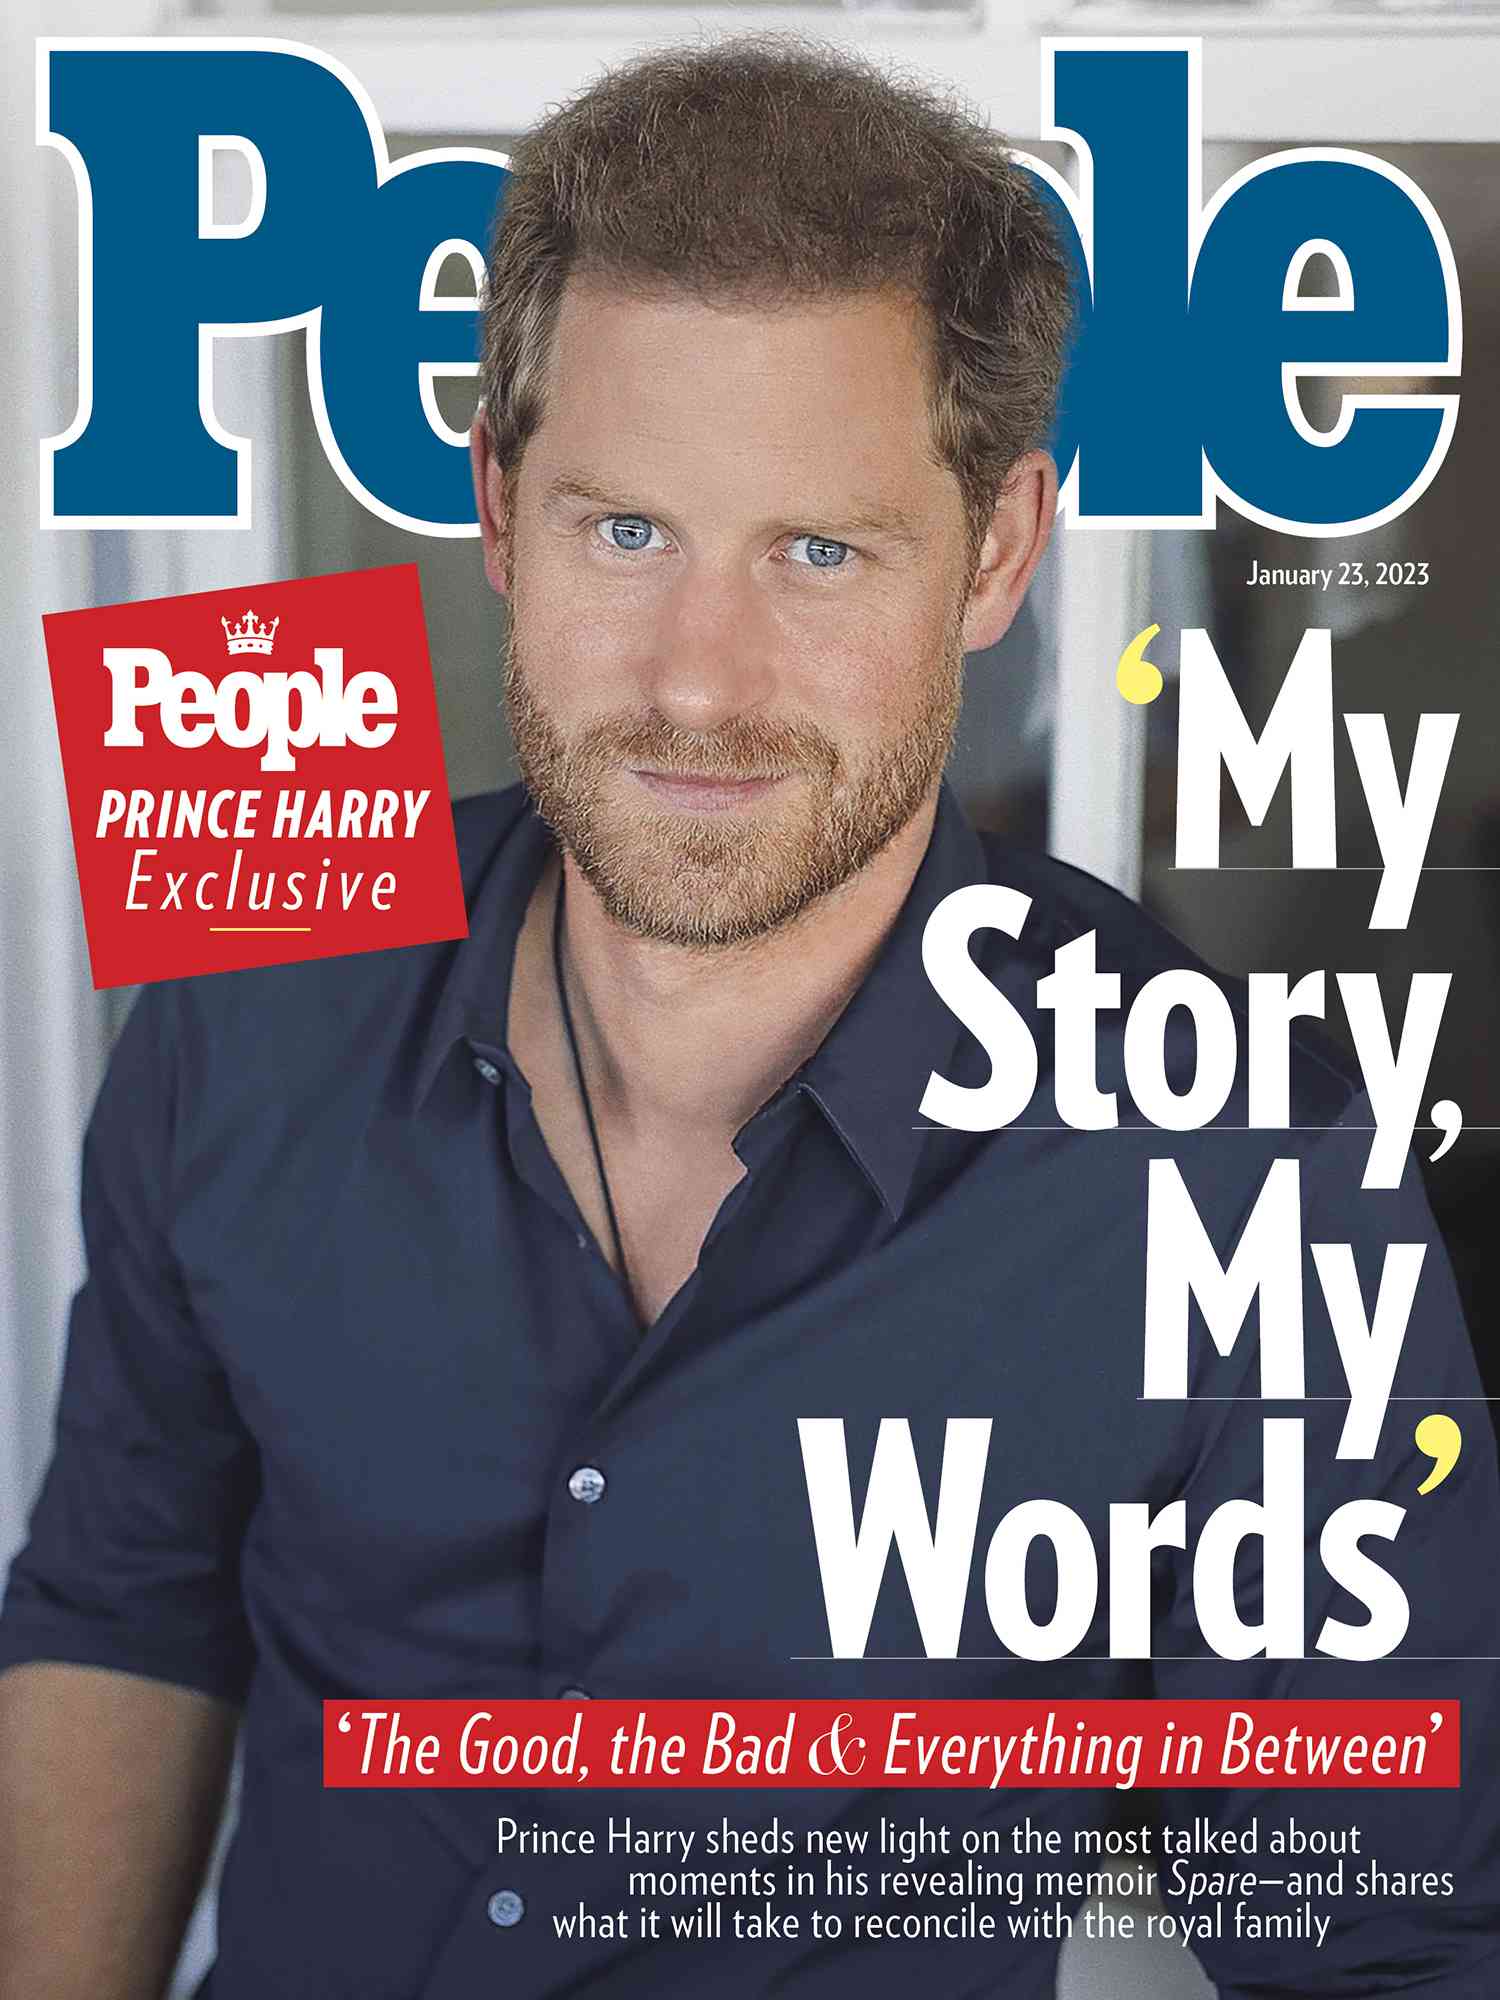 Prince Harry cover rollout